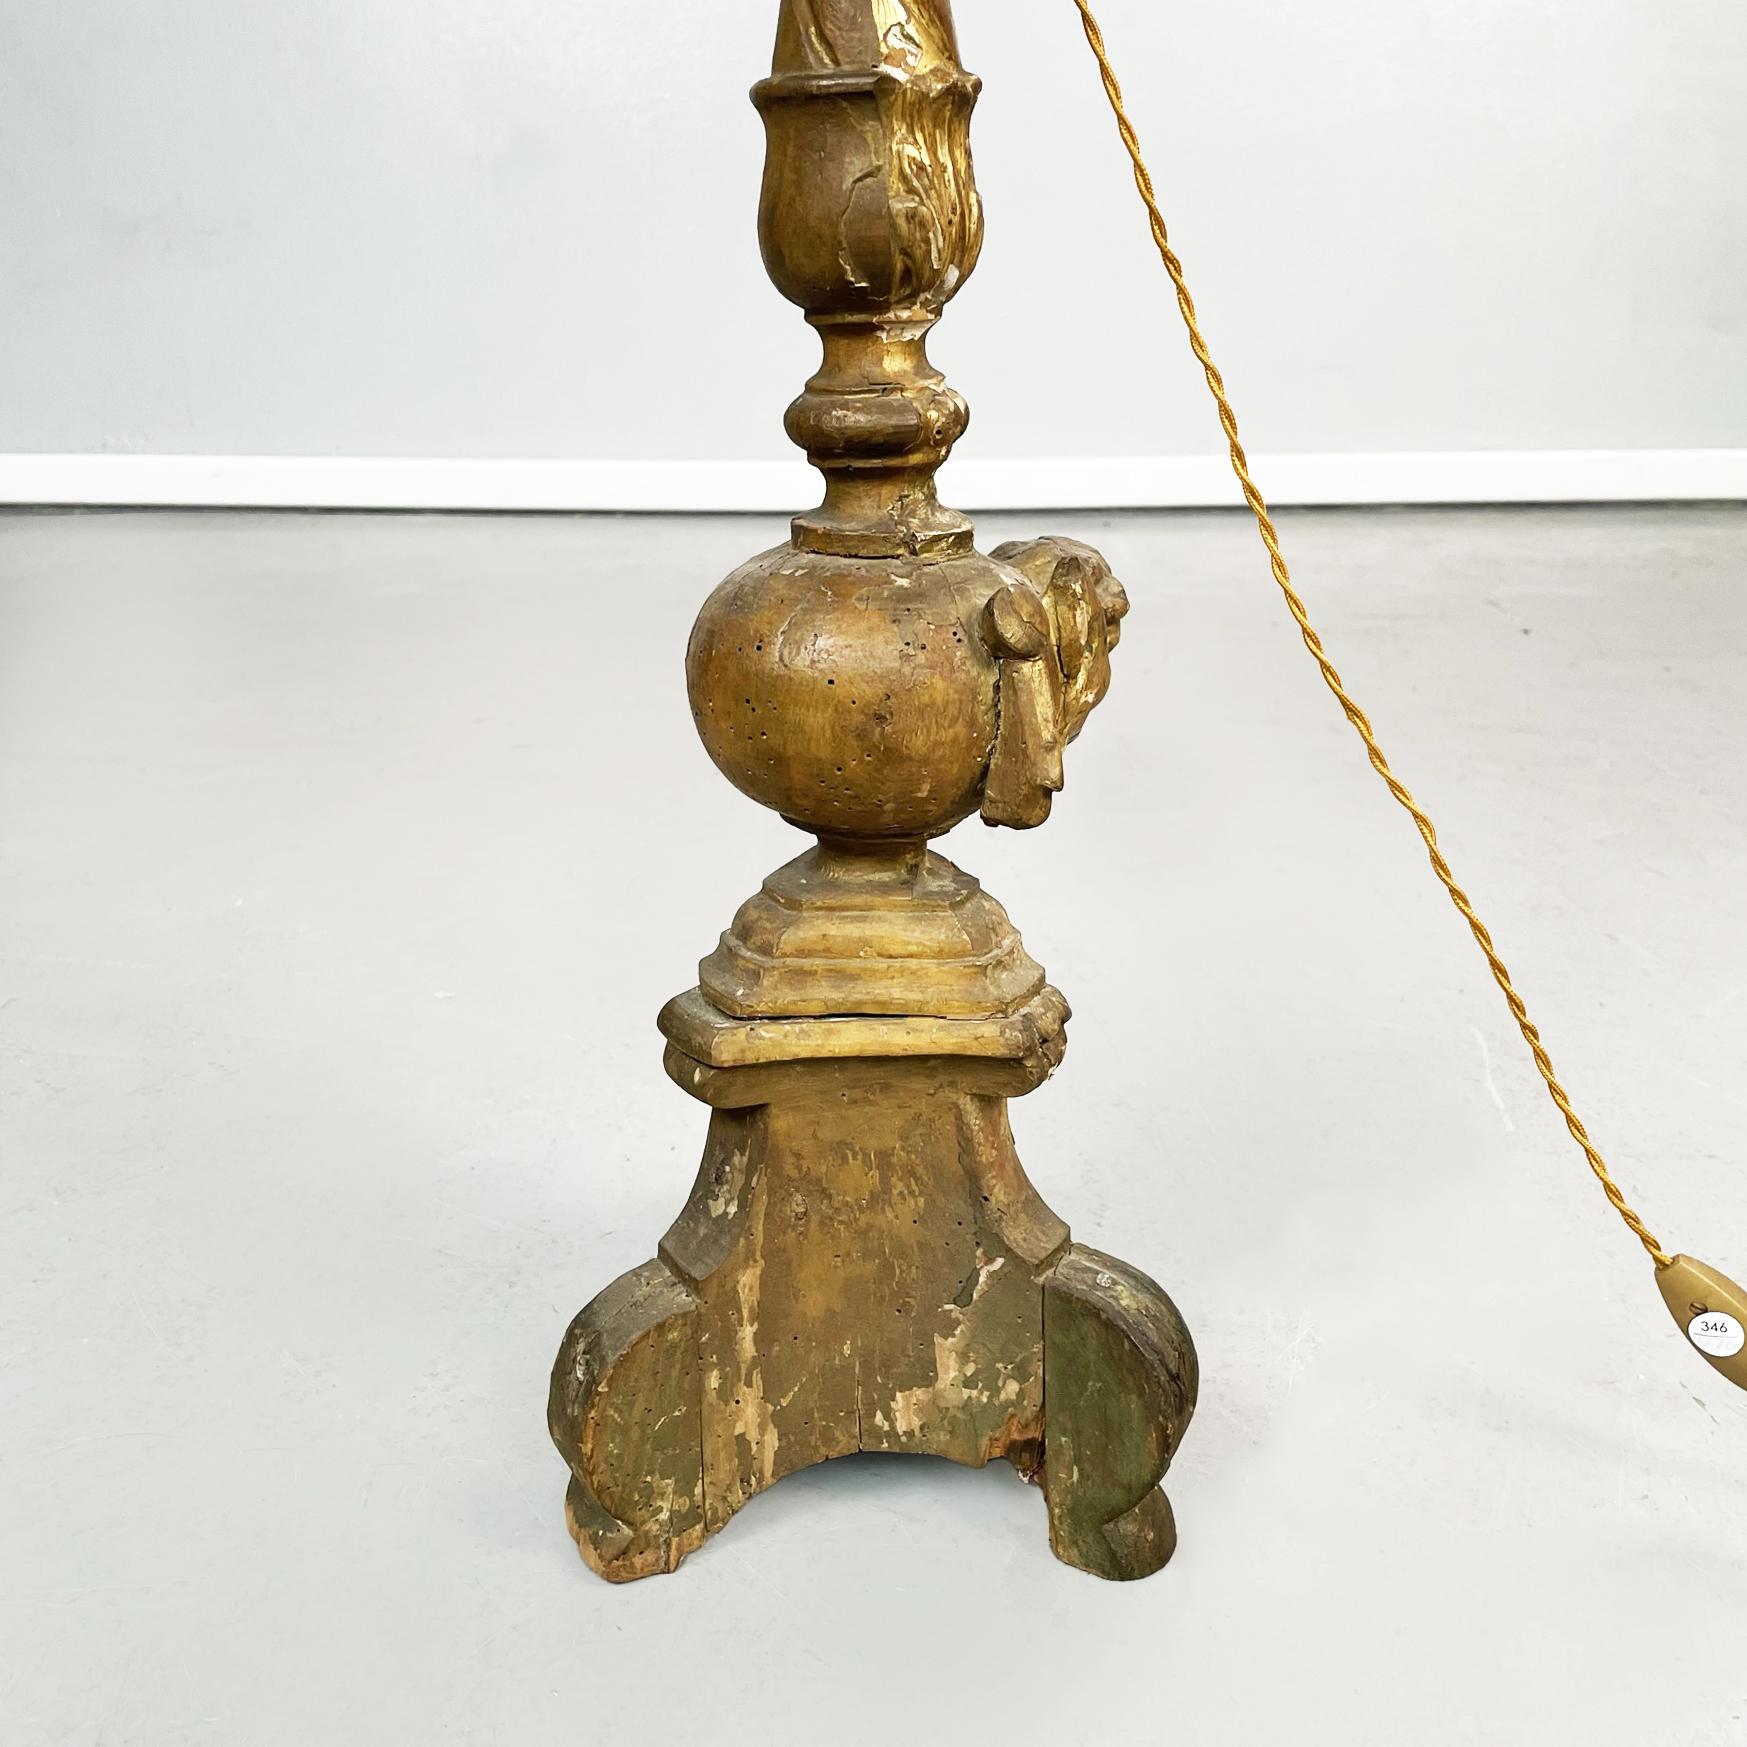 Italian Antique Candelabra Lamps in Gold Painted Wood and Beige Fabric, 1800s For Sale 8